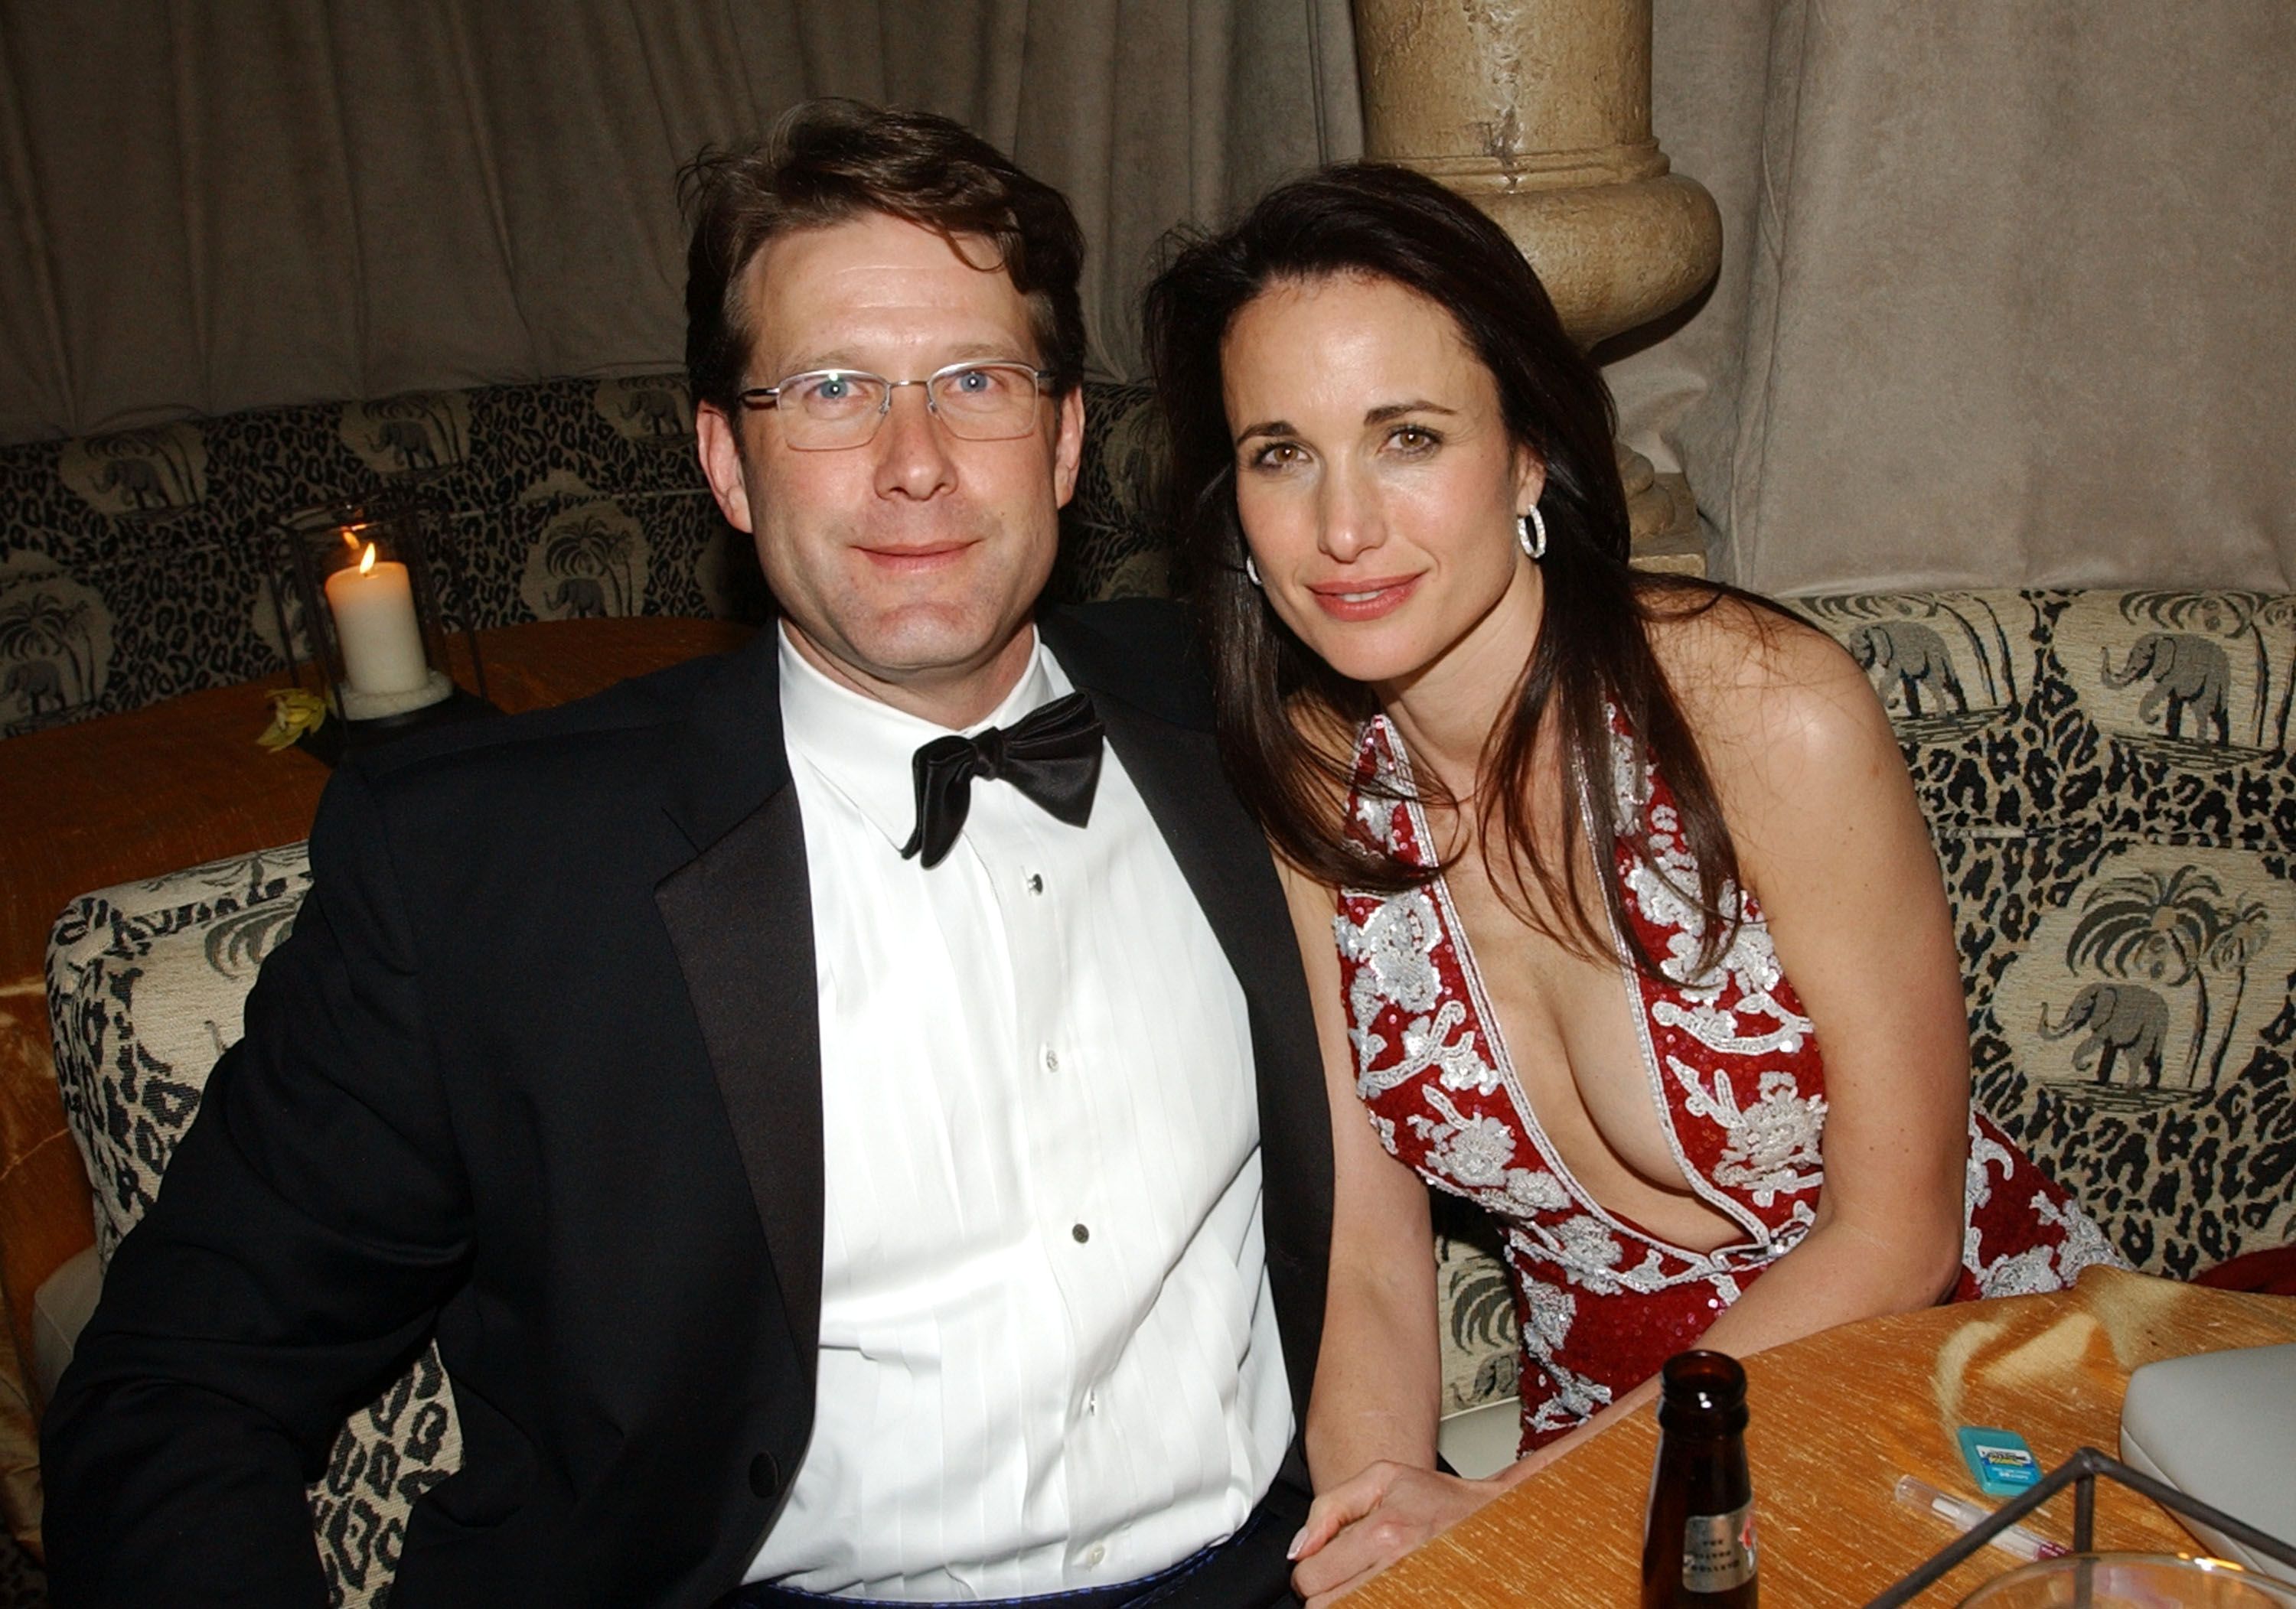 Andie MacDowell and Rhett DeCamp Hartzog during the HBO after-party at the Golden Globe Awards at the Beverly Hilton Hotel in Beverly Hills, California January 20, 2002. | Source: Getty Images